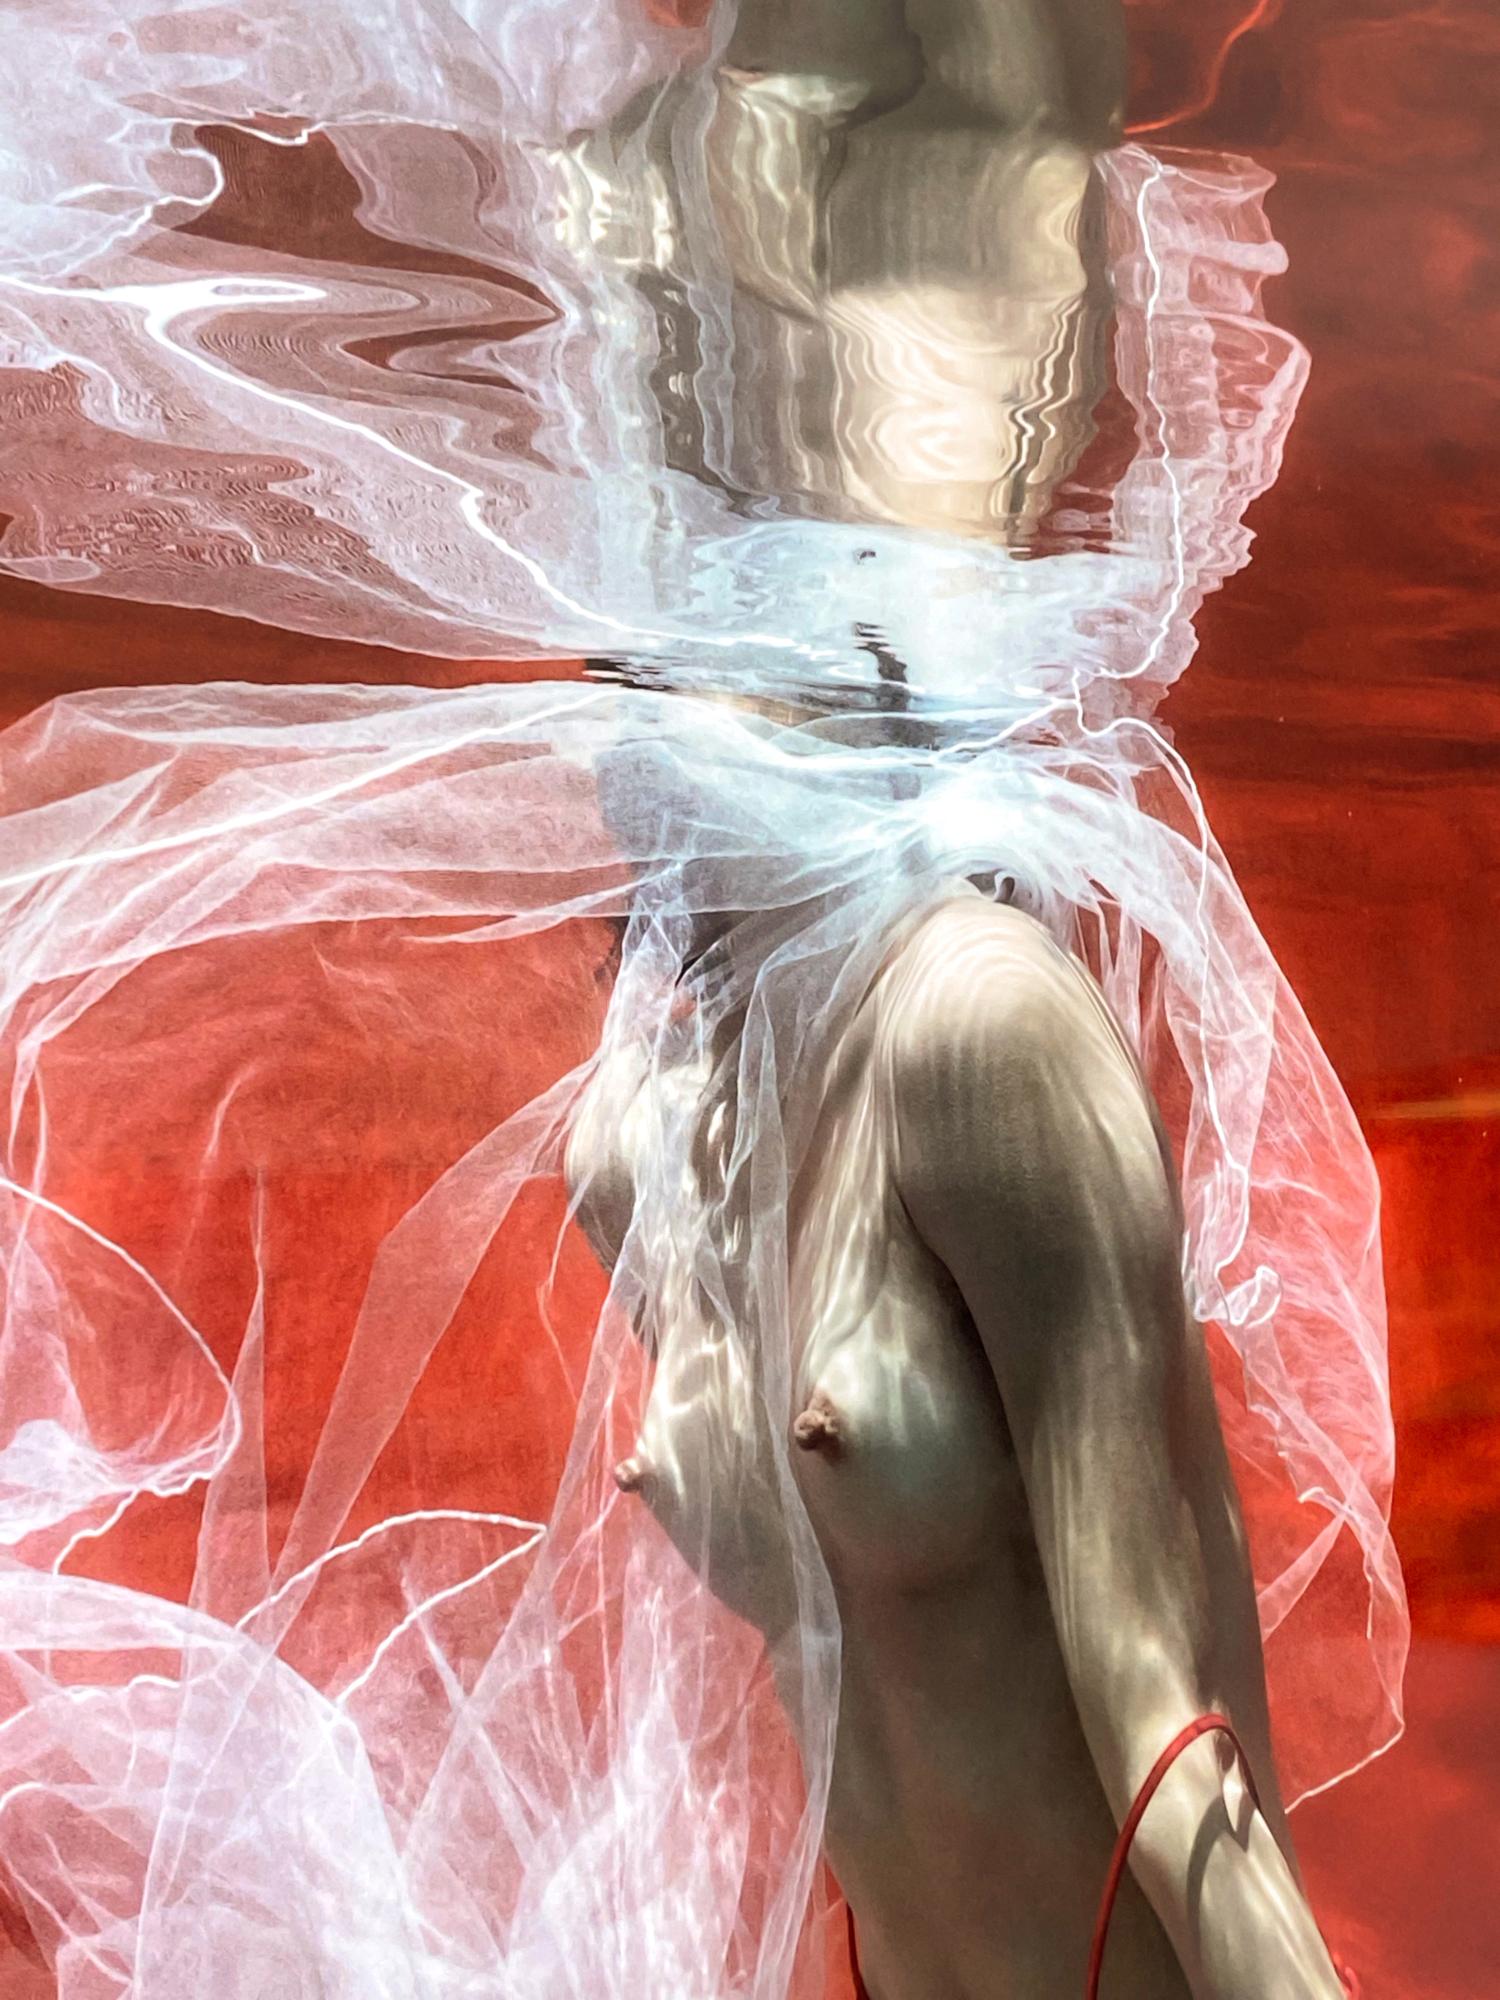 An underwater photograph of a topless young woman with white tulle scarf - taking off her red skirt on bright red background. 

Original digital print on aluminum plate signed by the artist.
Limited edition of 12, print #2
The artwork is furnished